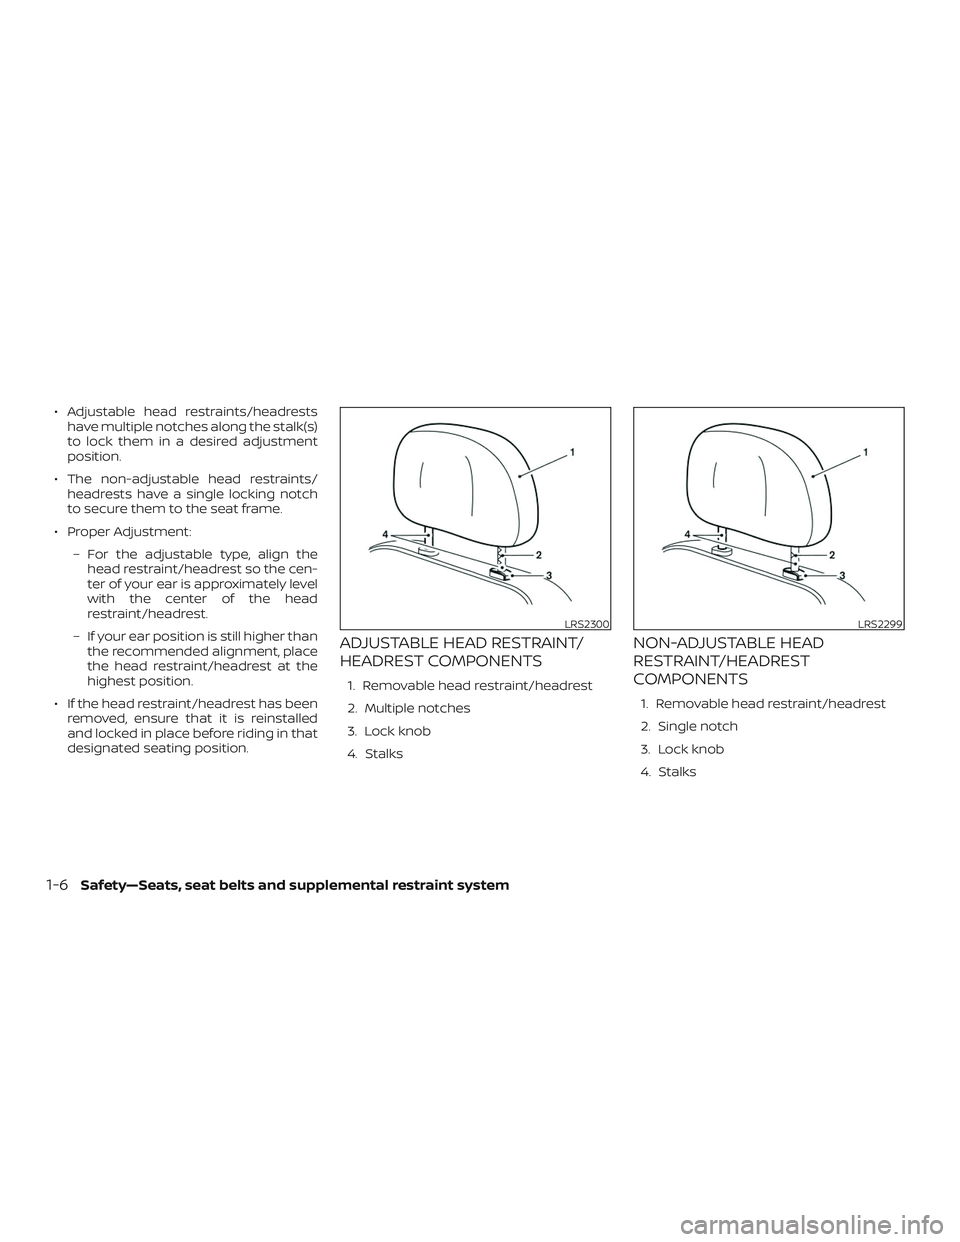 NISSAN LEAF 2018  Owner´s Manual ∙ Adjustable head restraints/headrestshave multiple notches along the stalk(s)
to lock them in a desired adjustment
position.
∙ The non-adjustable head restraints/ headrests have a single locking 